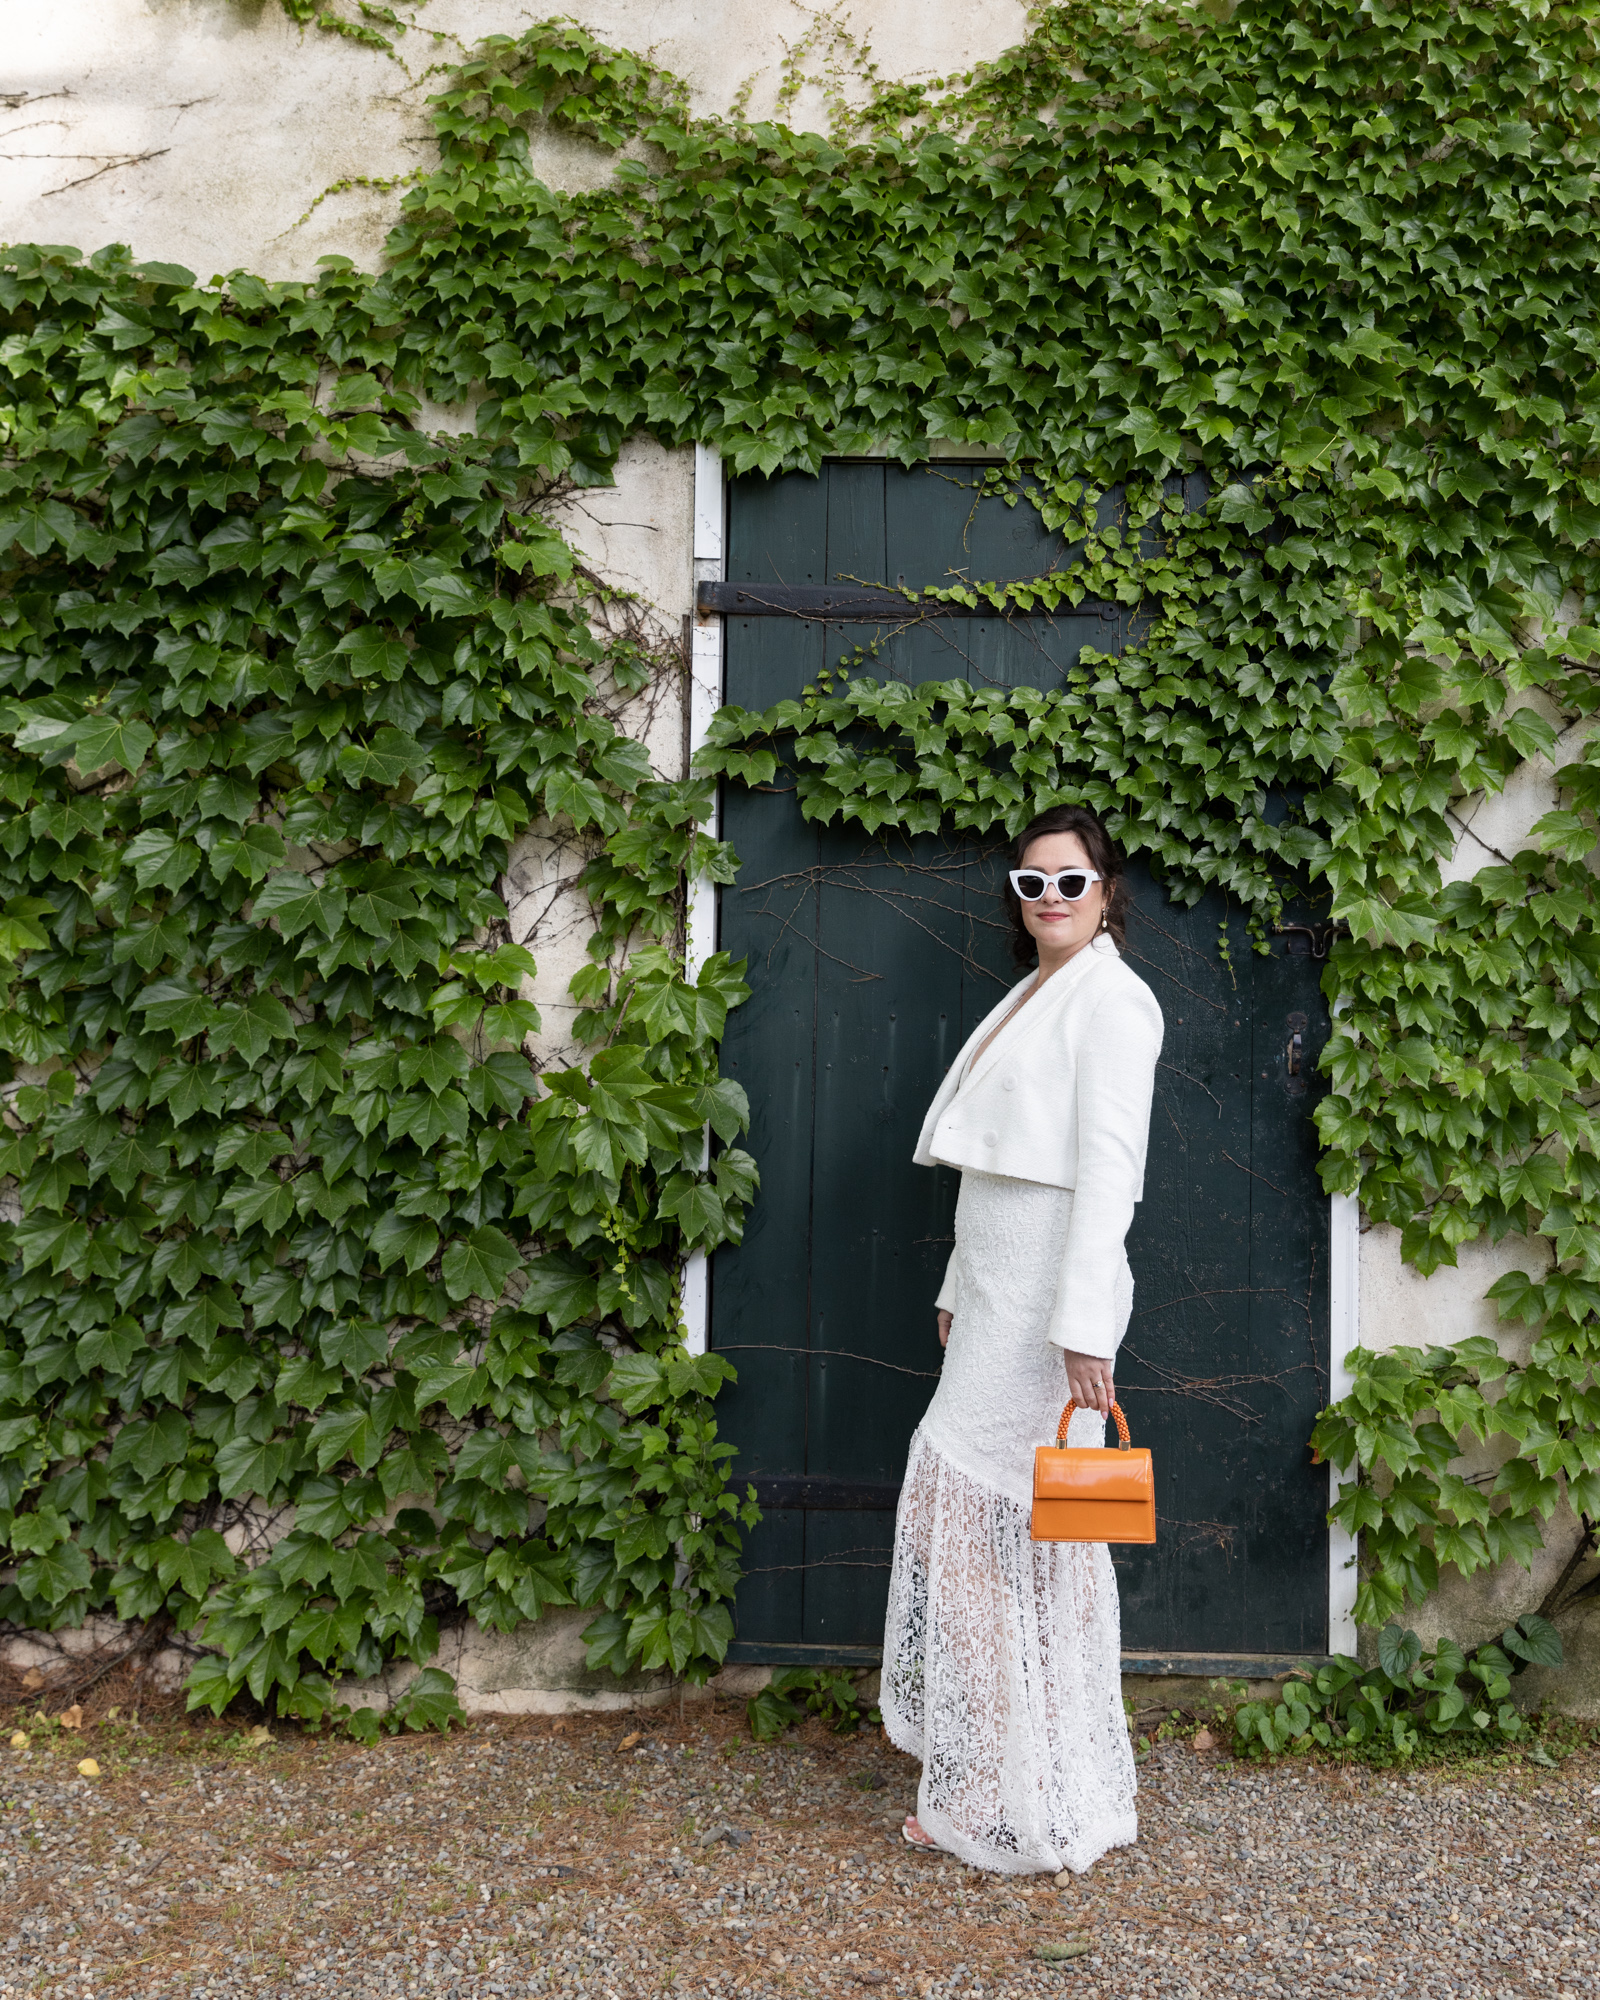 Cool bride poses wearing white cat eye sunglasses and orange purse in front of an ivy covered wall at Bridgeton House on the Delaware in Bucks County, PA